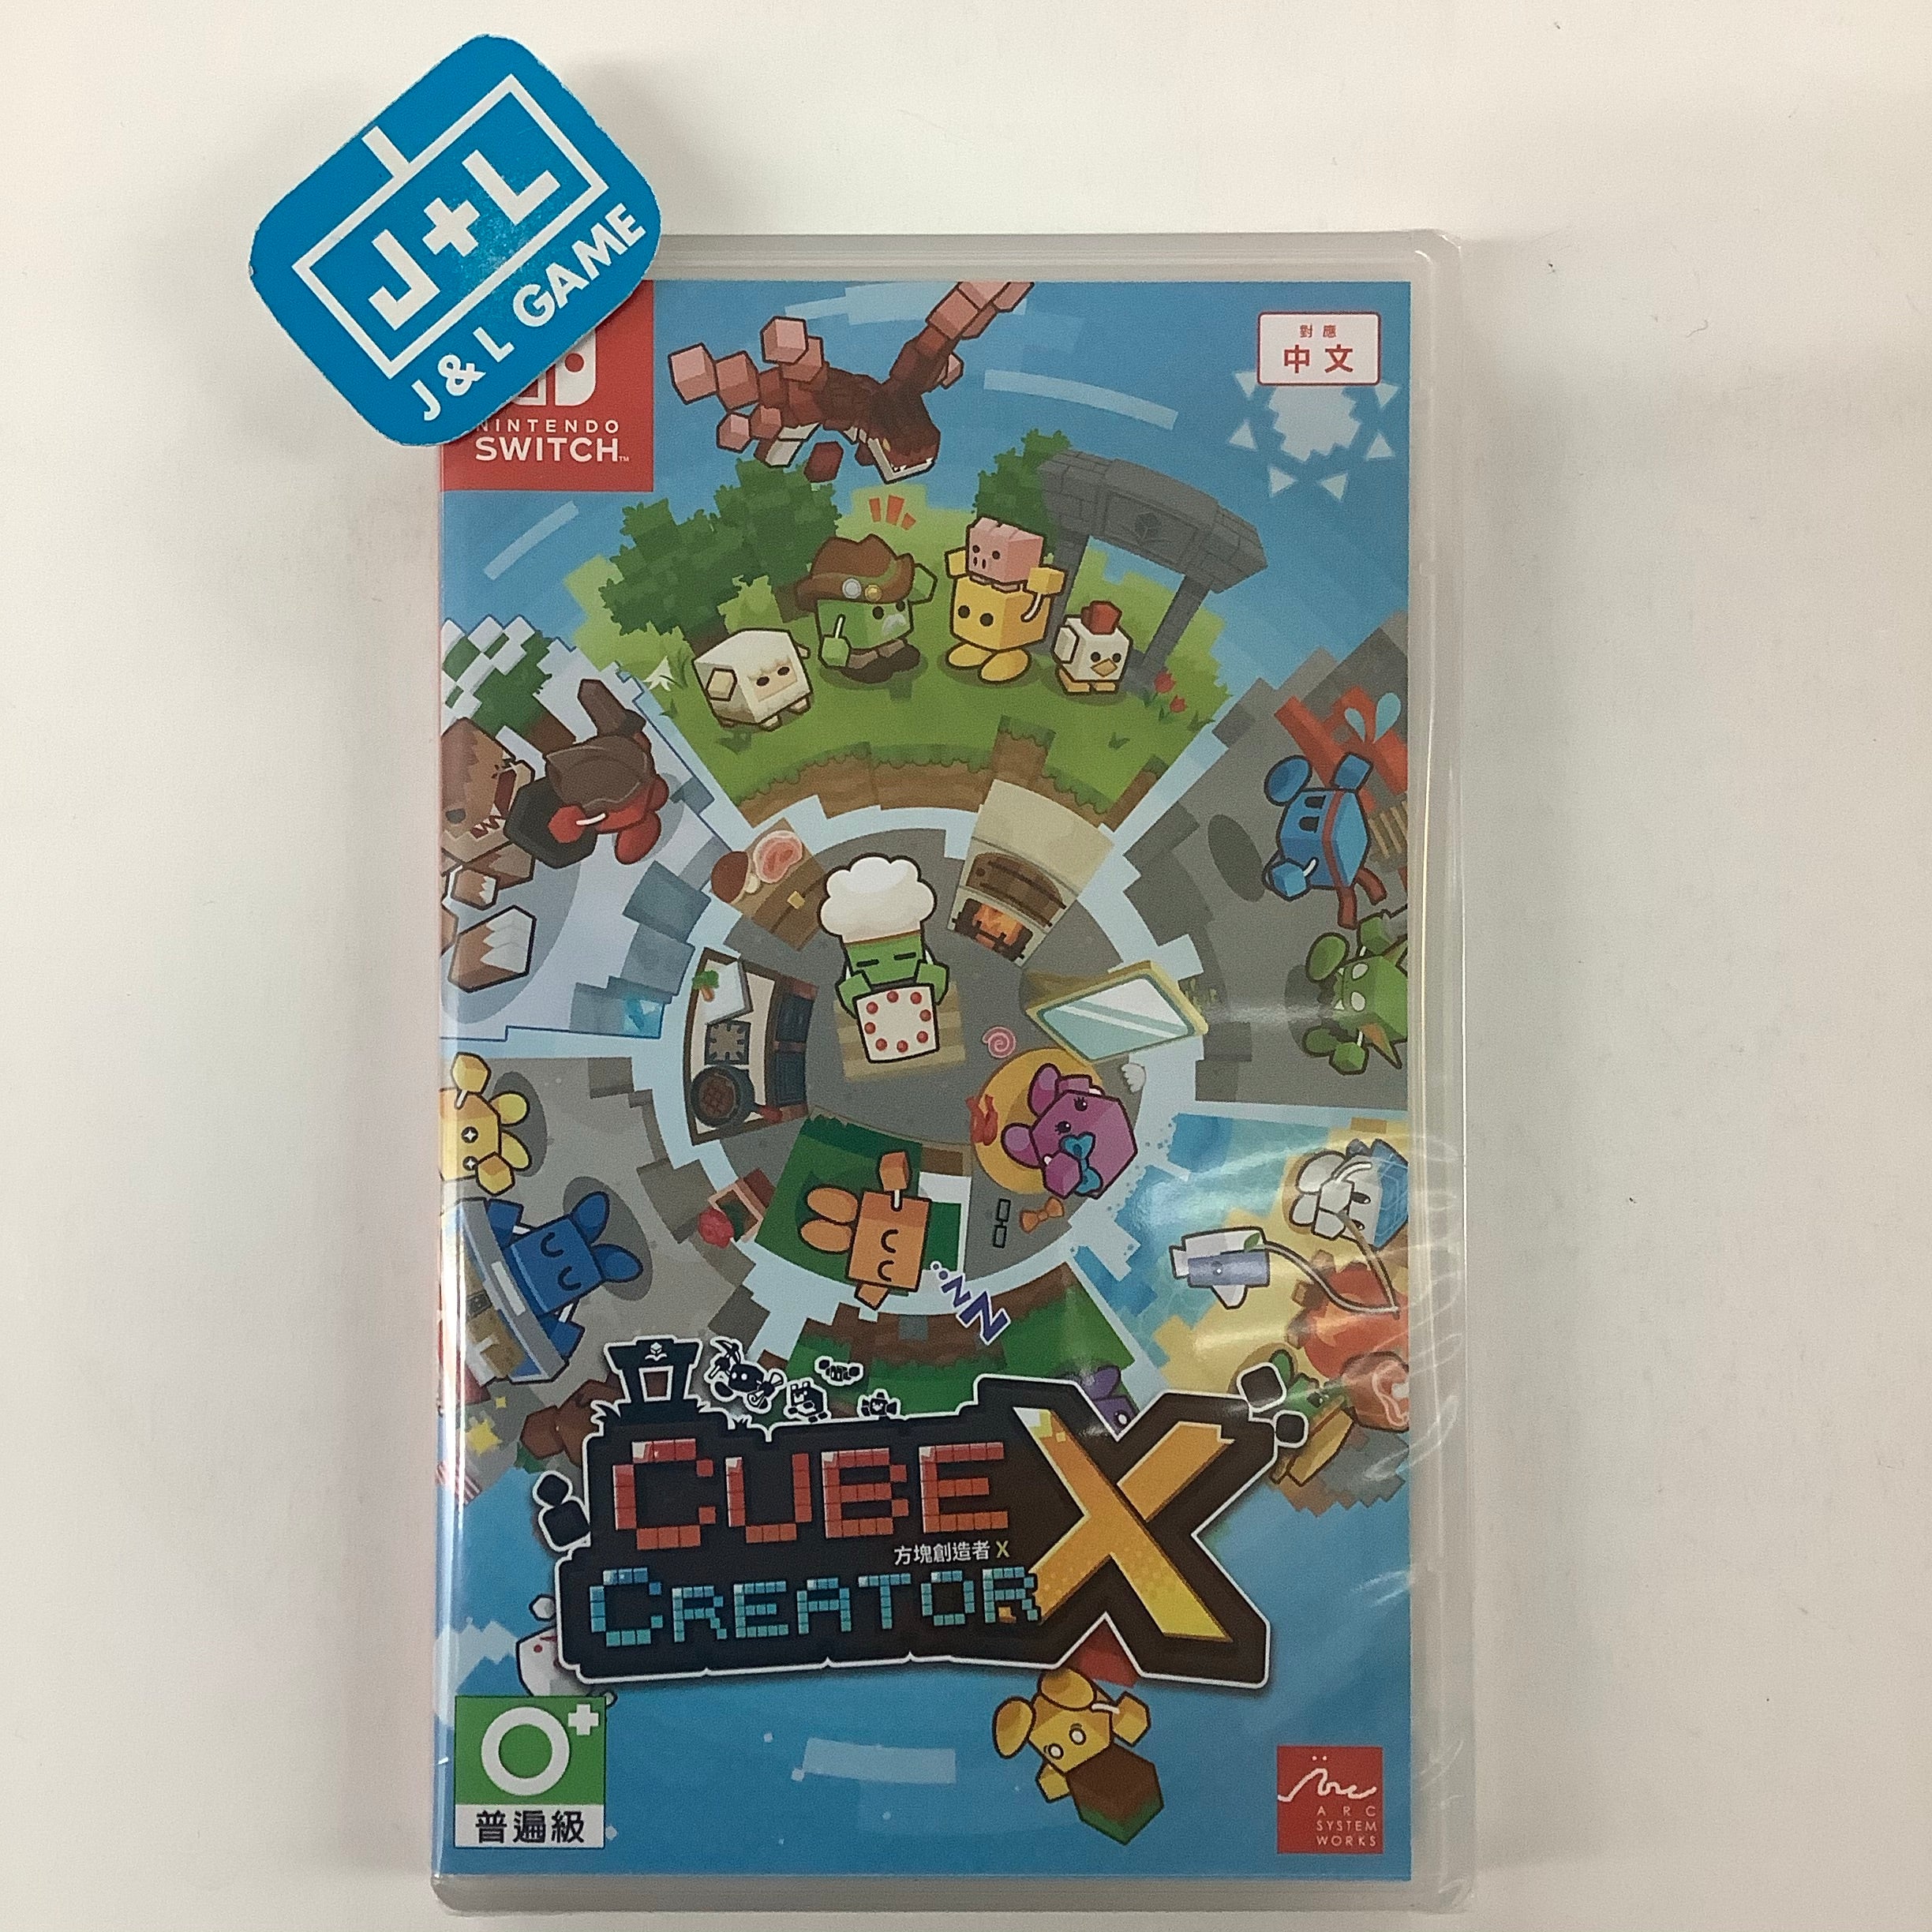 Cube Creator X - (NSW) Nintendo Switch (Asia Import) Video Games Arc System Works   